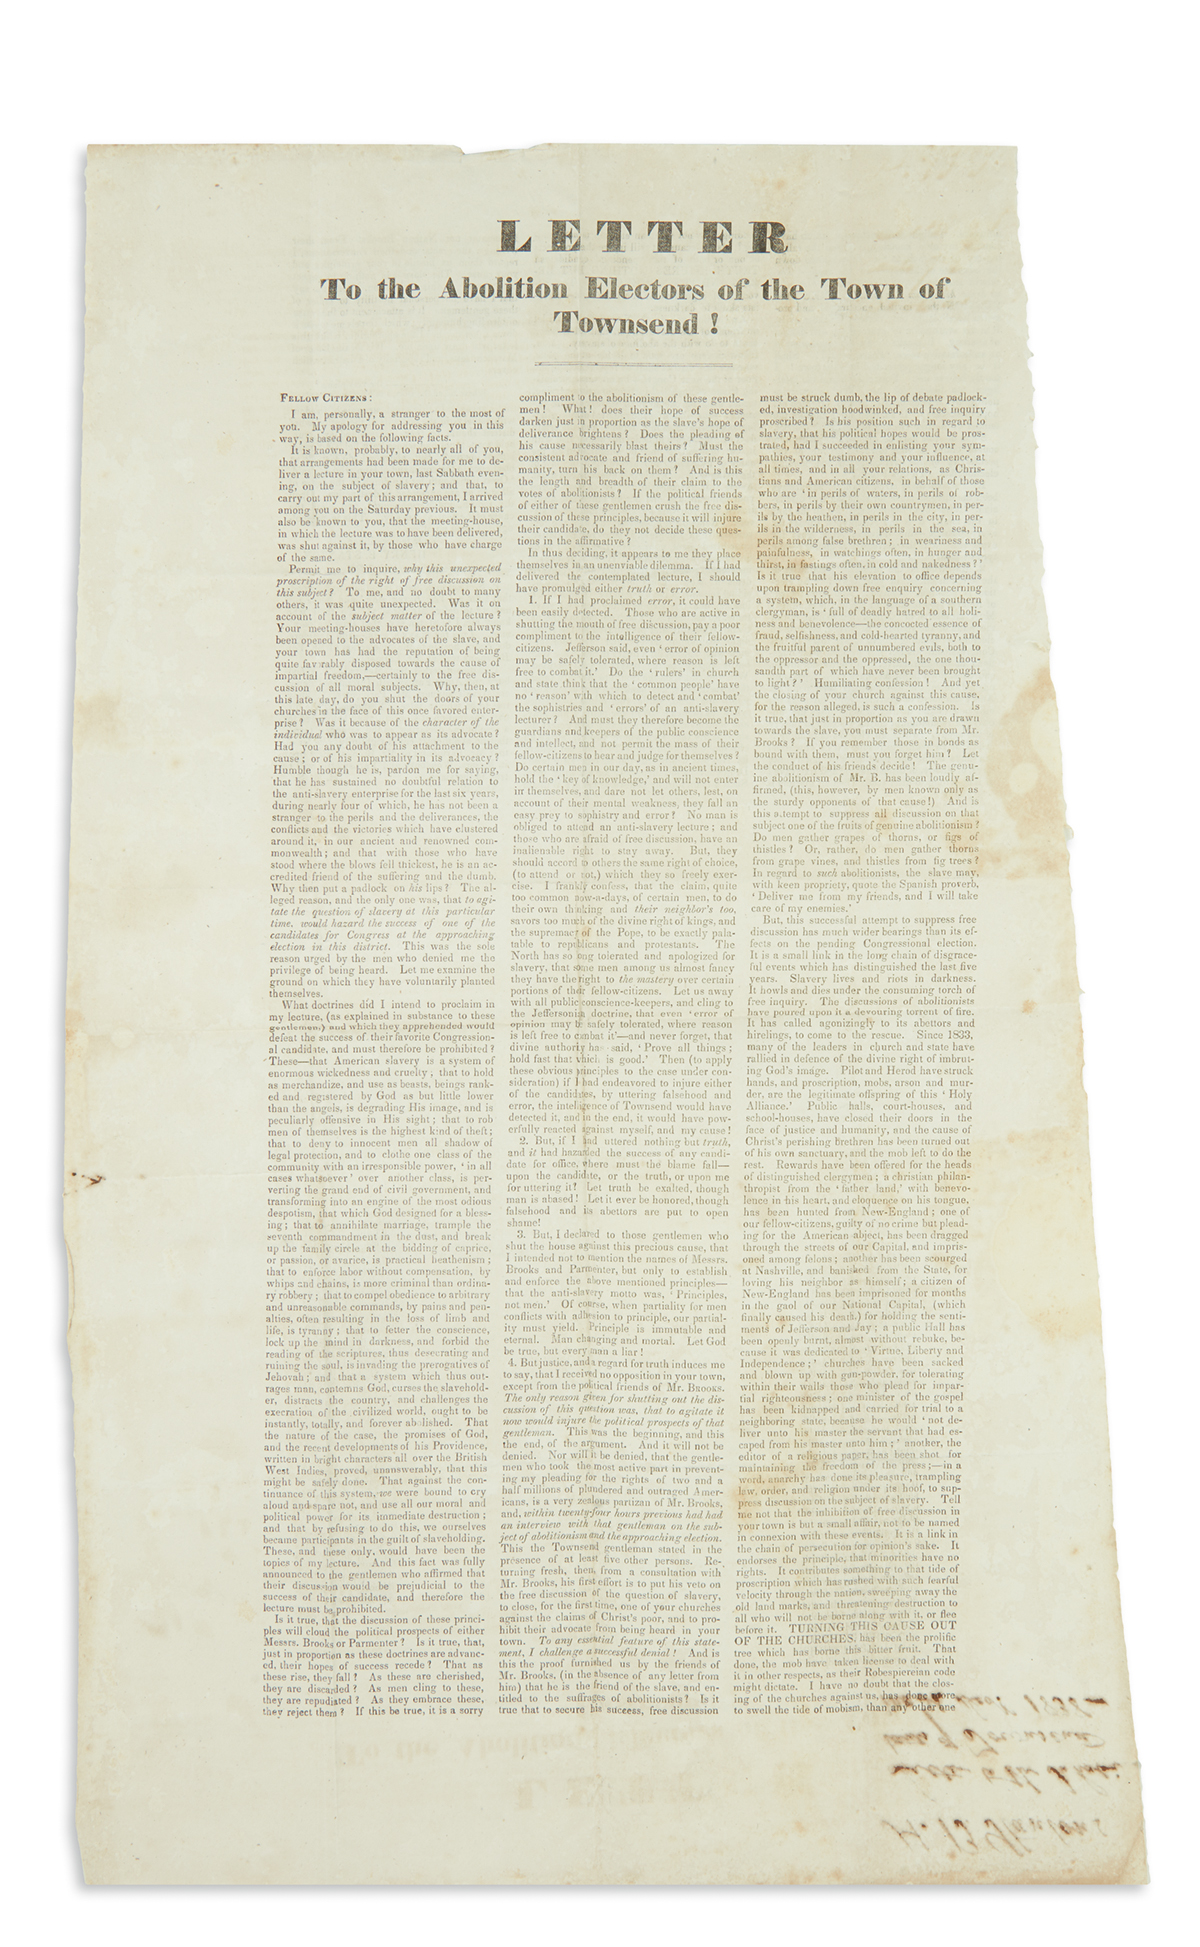 (SLAVERY AND ABOLITION.) Stanton, Henry Brewster. Letter to the Abolition Electors of the Town of Townsend!